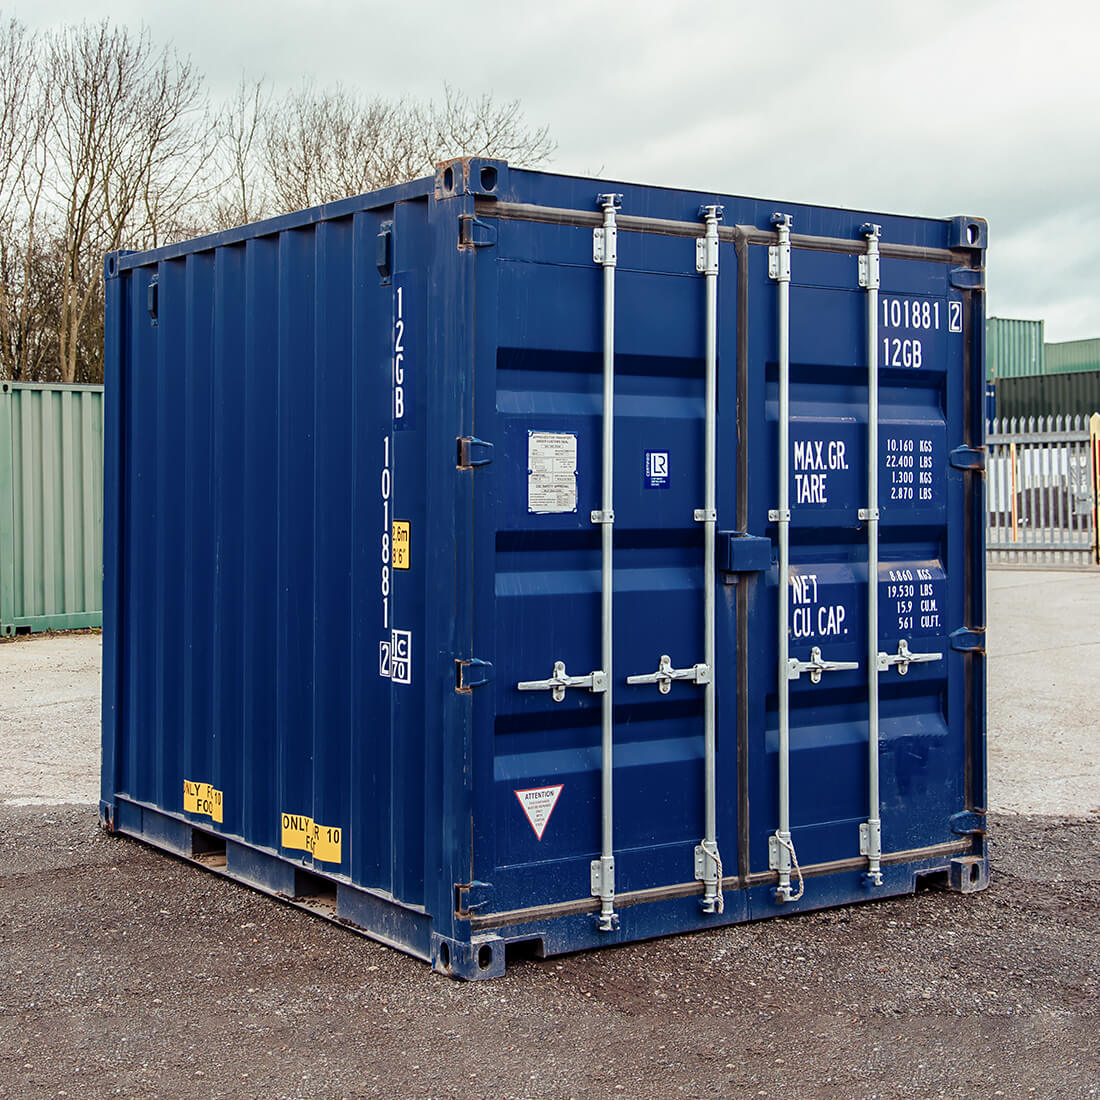 Square container in yard